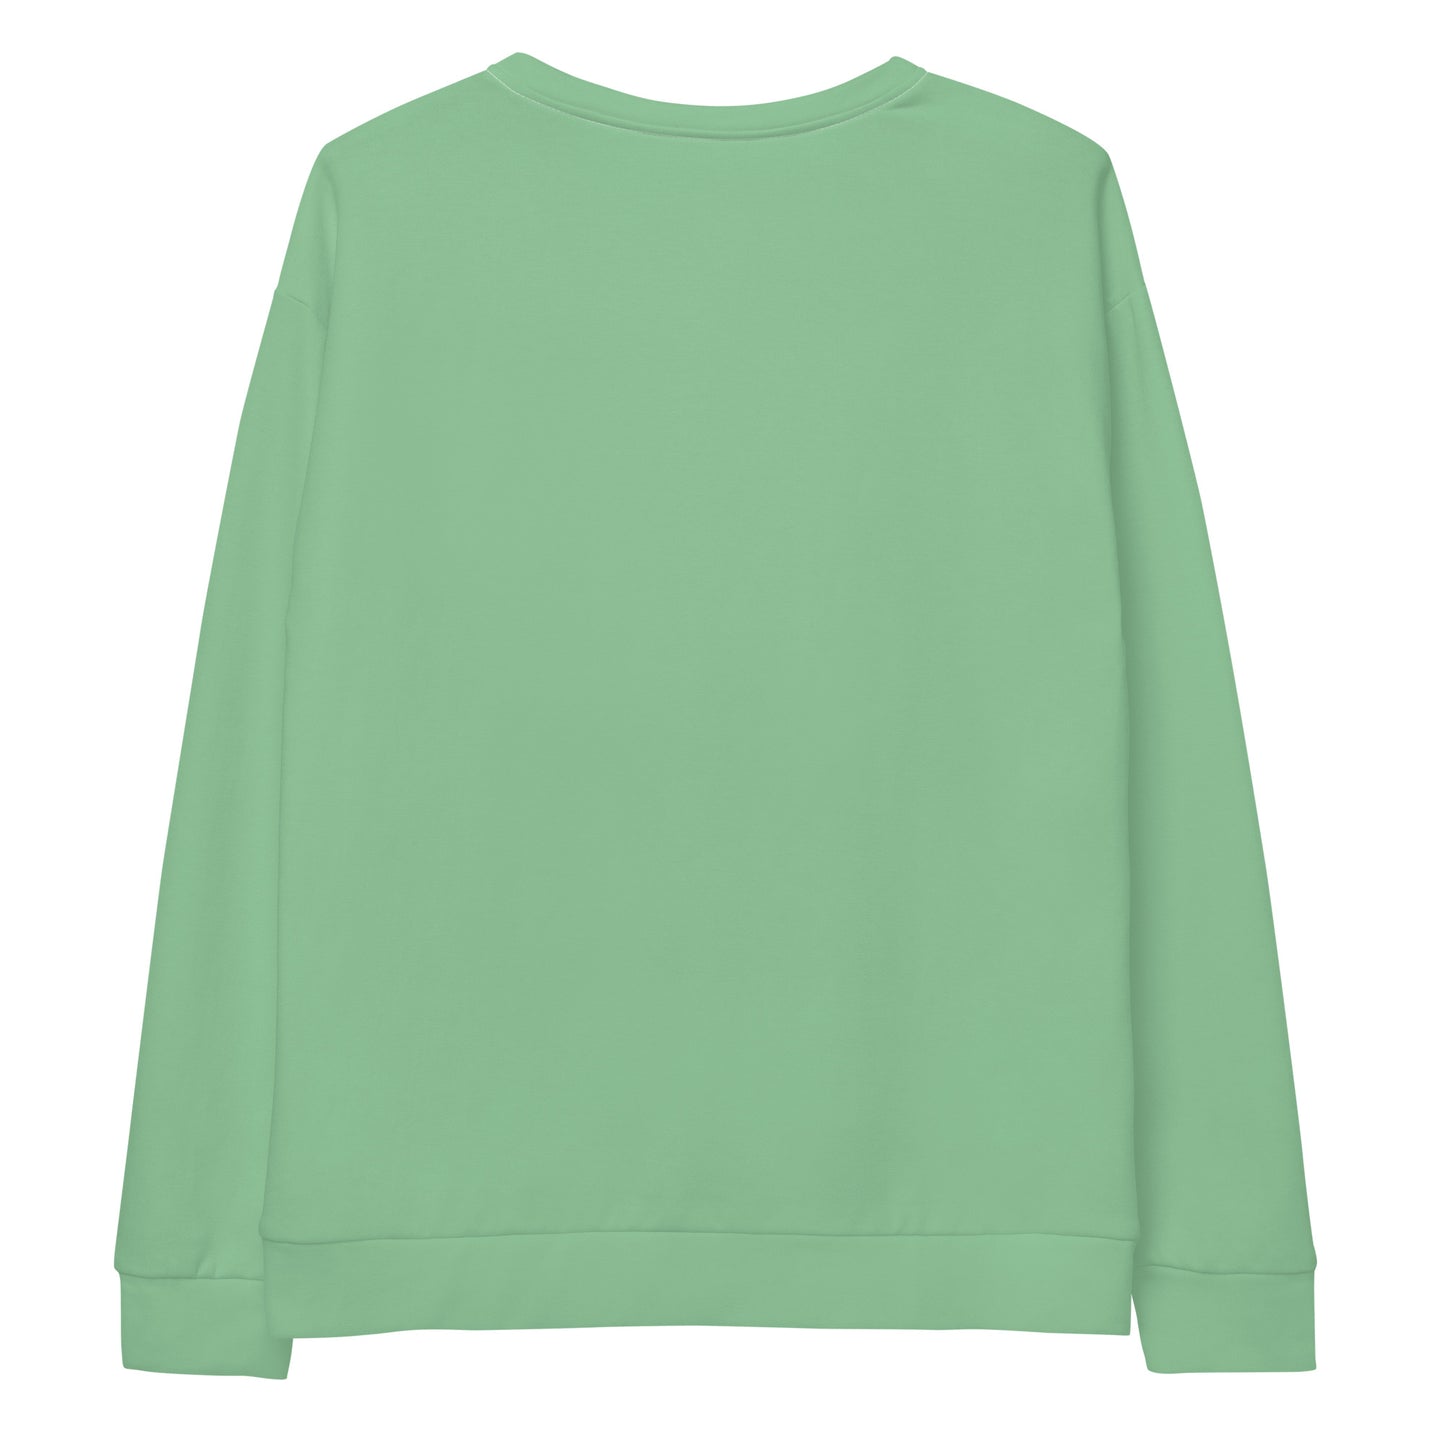 Vertical Lines Mint - Sustainably Made Sweatshirt